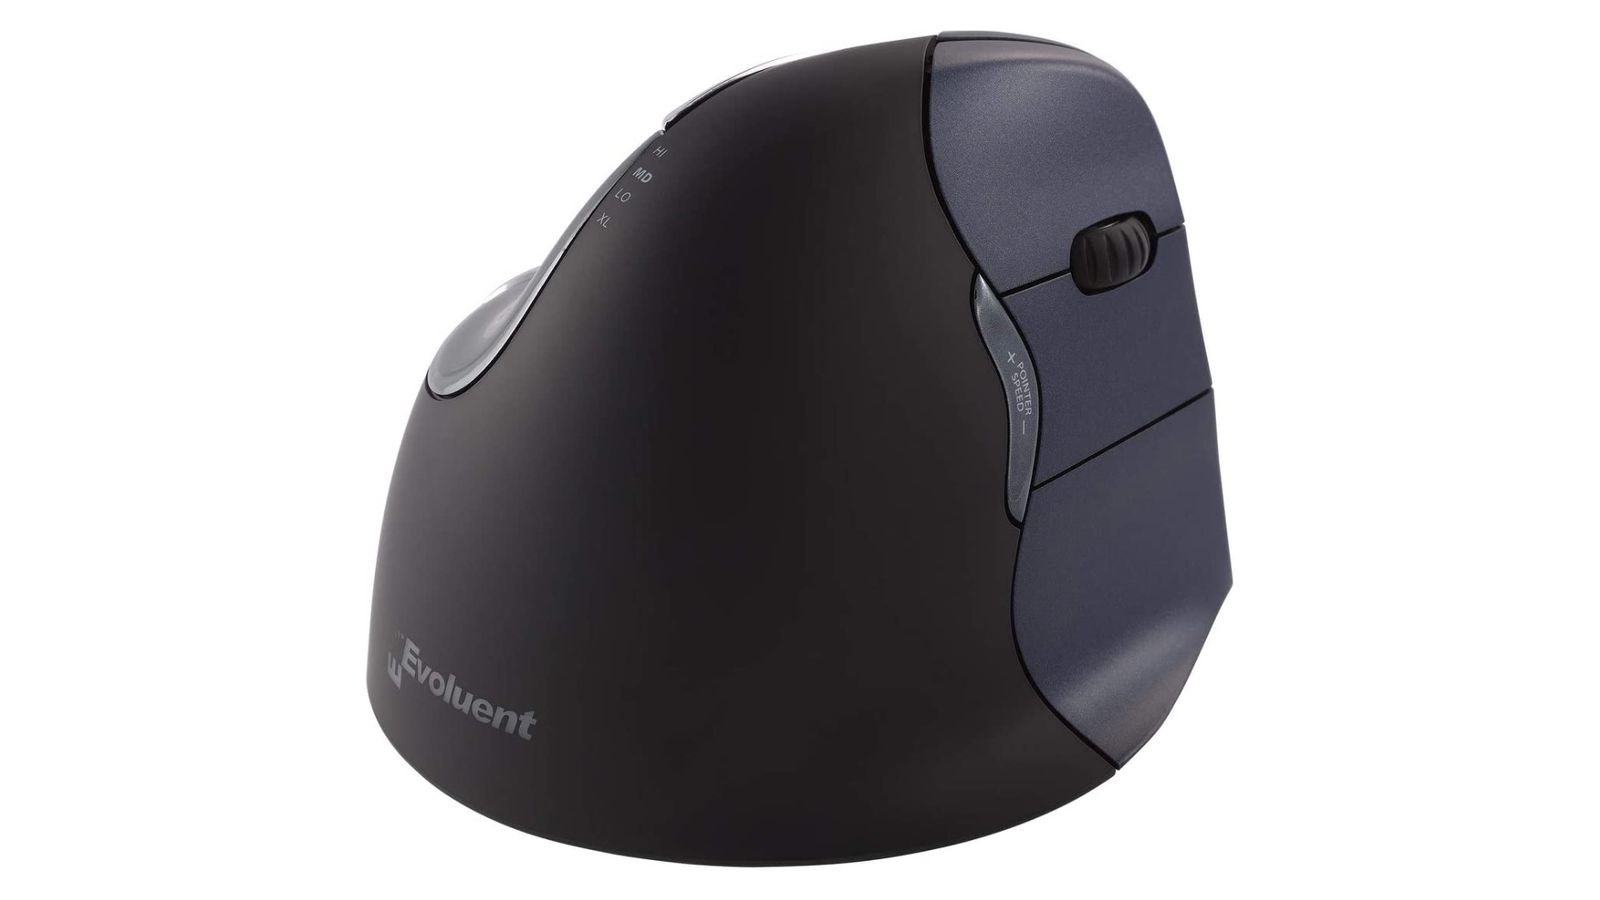 Evoluent VM4RW VerticalMouse 4 product image of a black, ergonomic, vertical mouse.